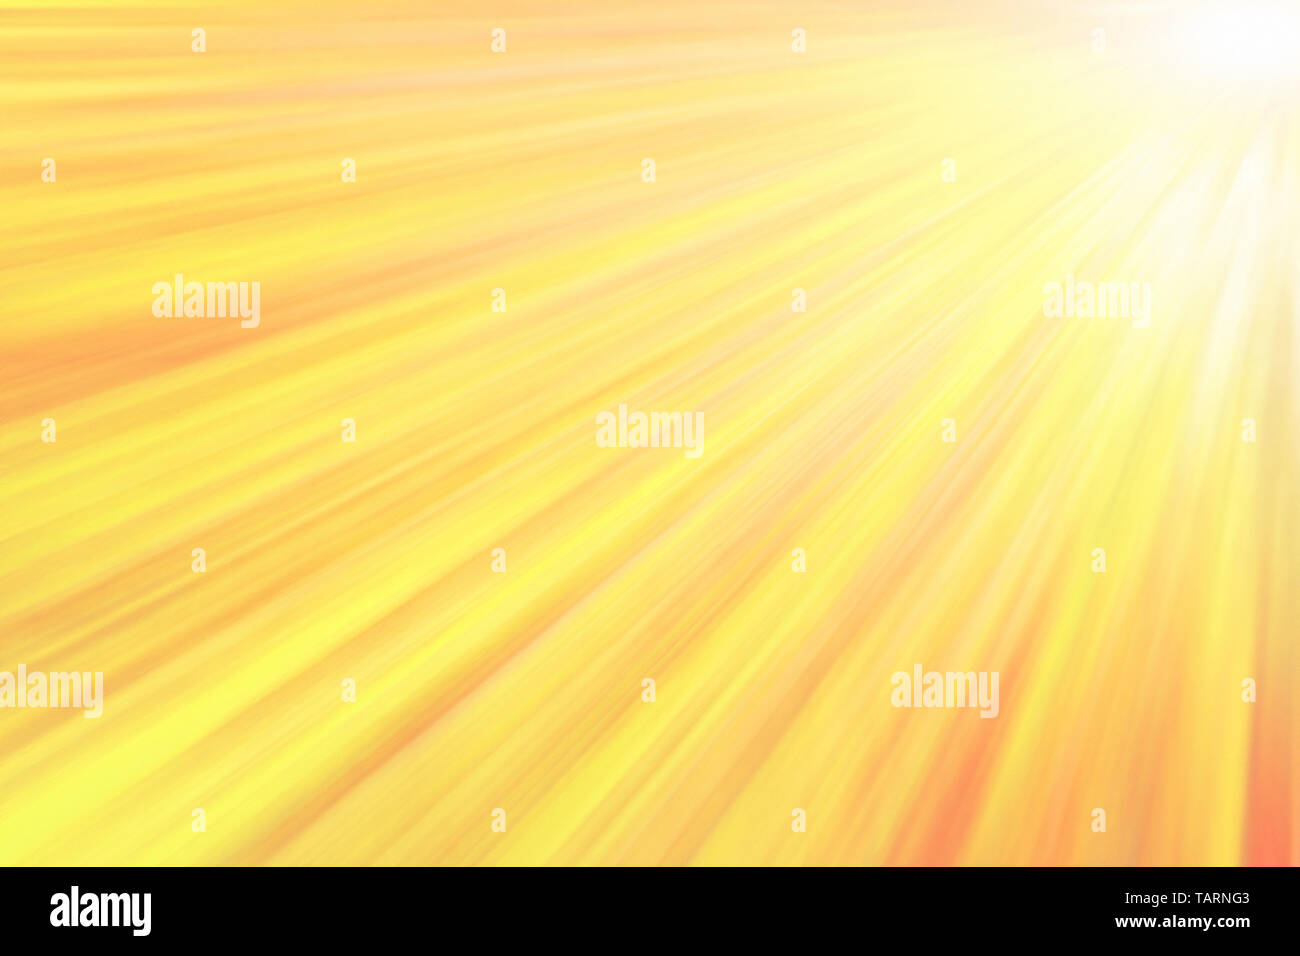 Glowing yellow sun beams. Abstract bright texture and background Stock Photo